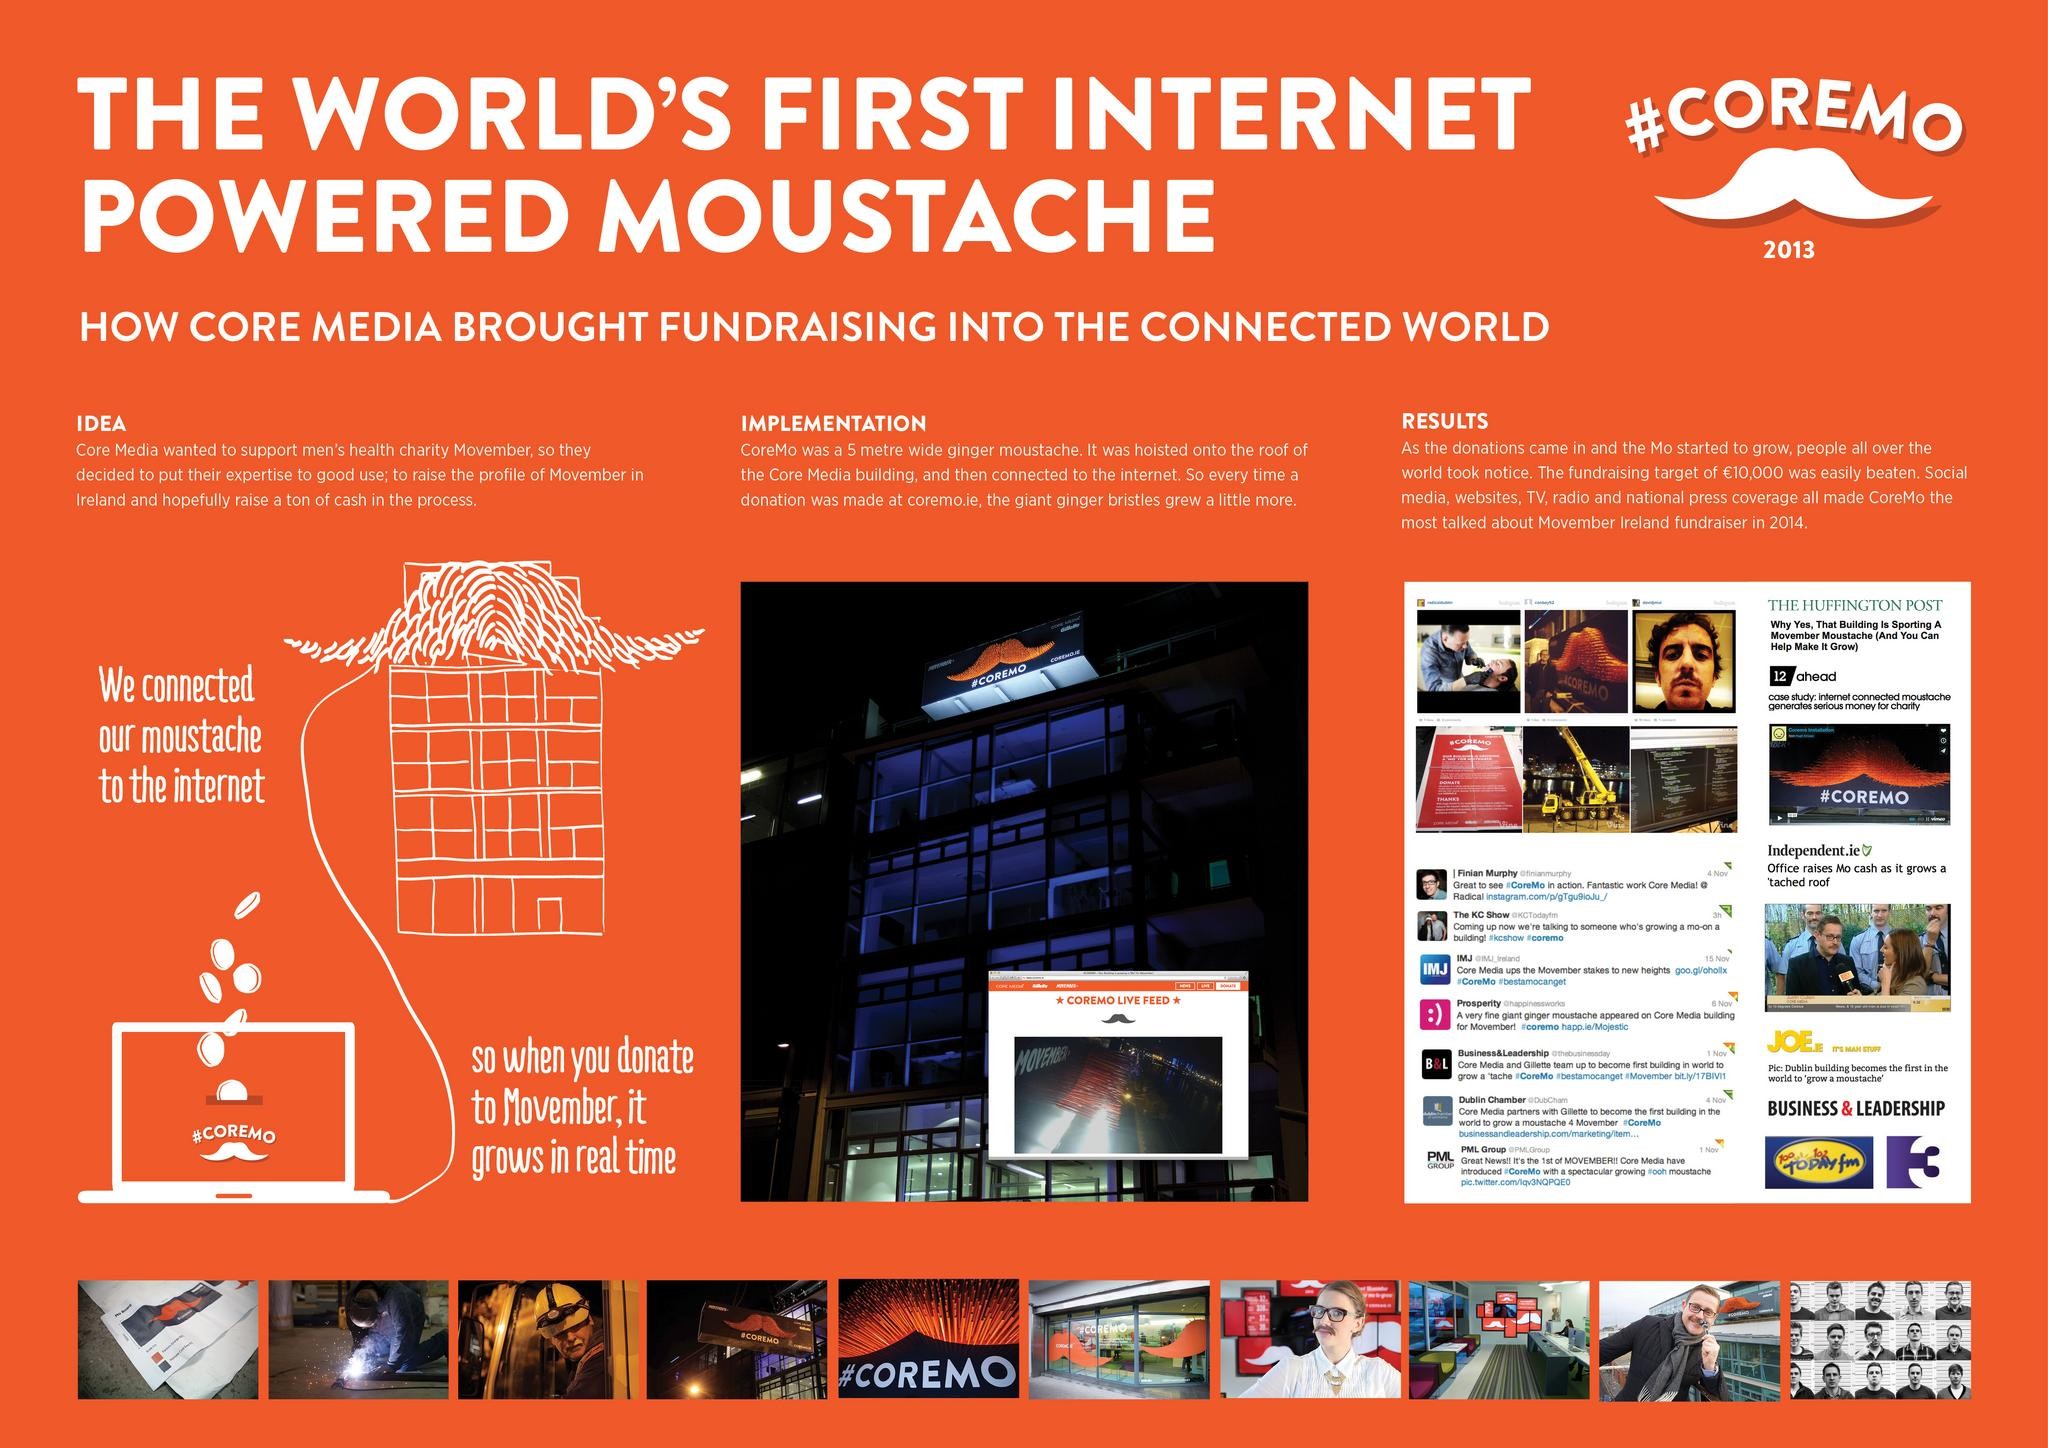 COREMO - THE WORLD'S FIRST INTERNET-POWERED MOUSTACHE